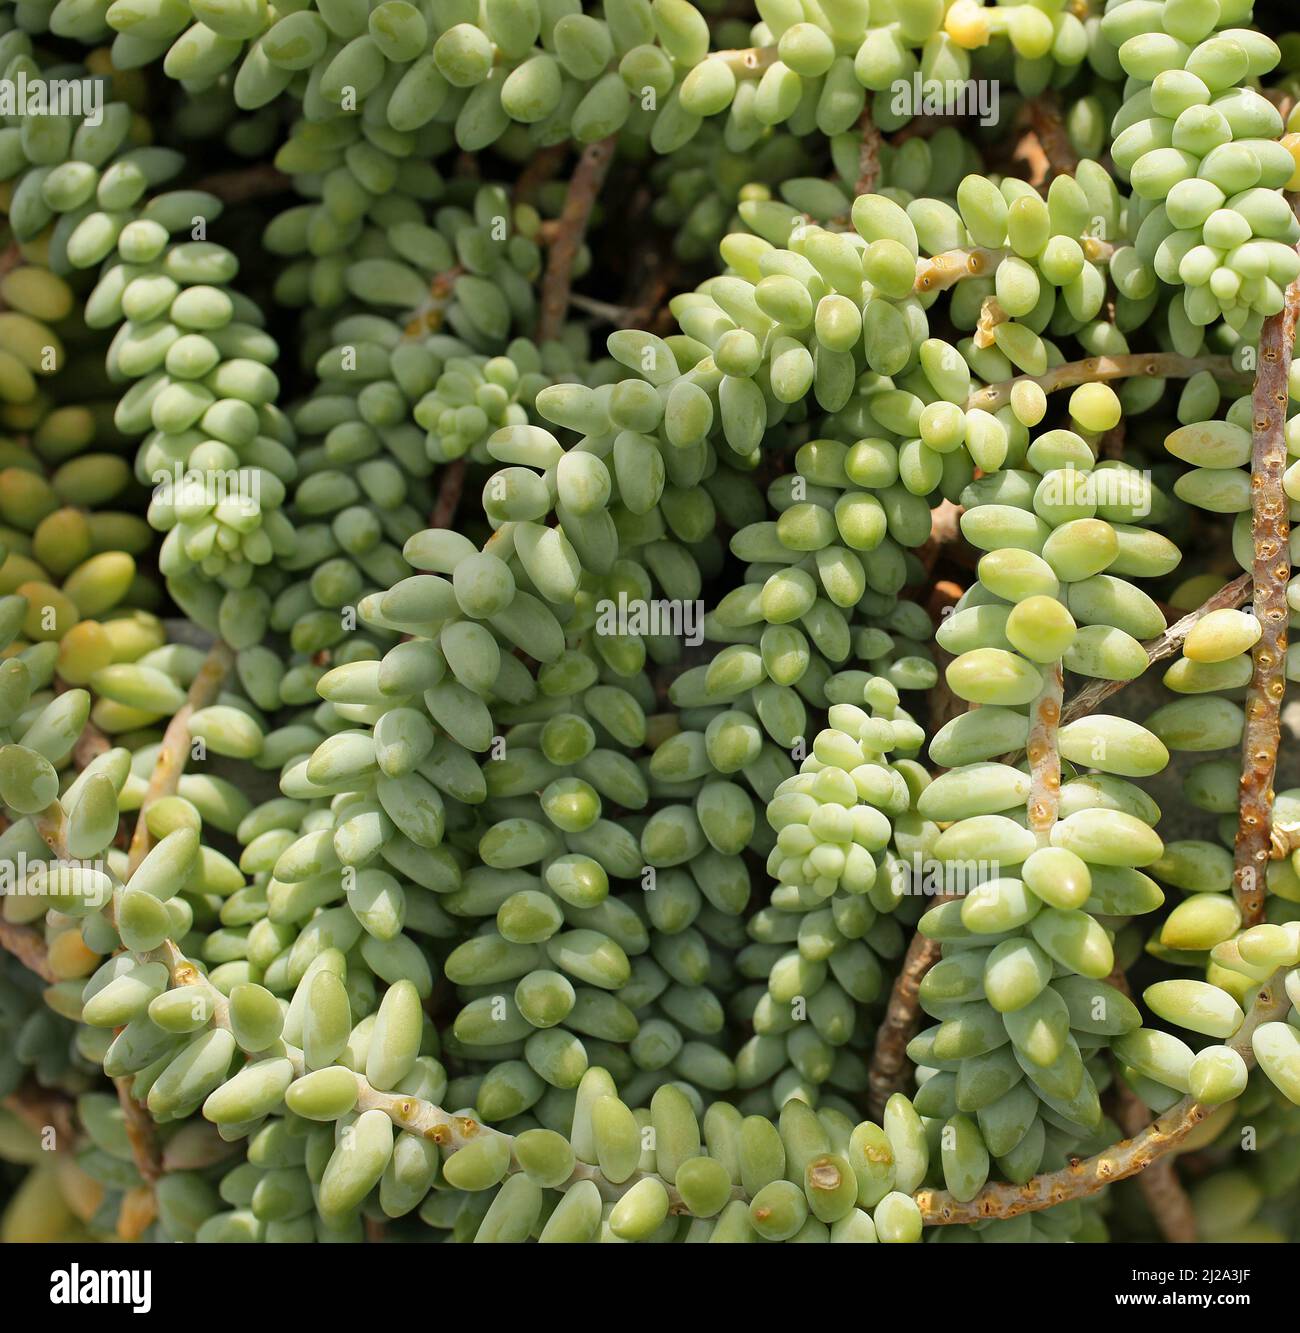 Sedum morganianum,Donkey tail or Burro's tail.Species of flowering plant in the family Crassulaceae.Native to southern Mexico.Succulent perennial producing trailing stems.Fleshy blue-green leaves.Terminal pink to red flowers in summer. Stock Photo